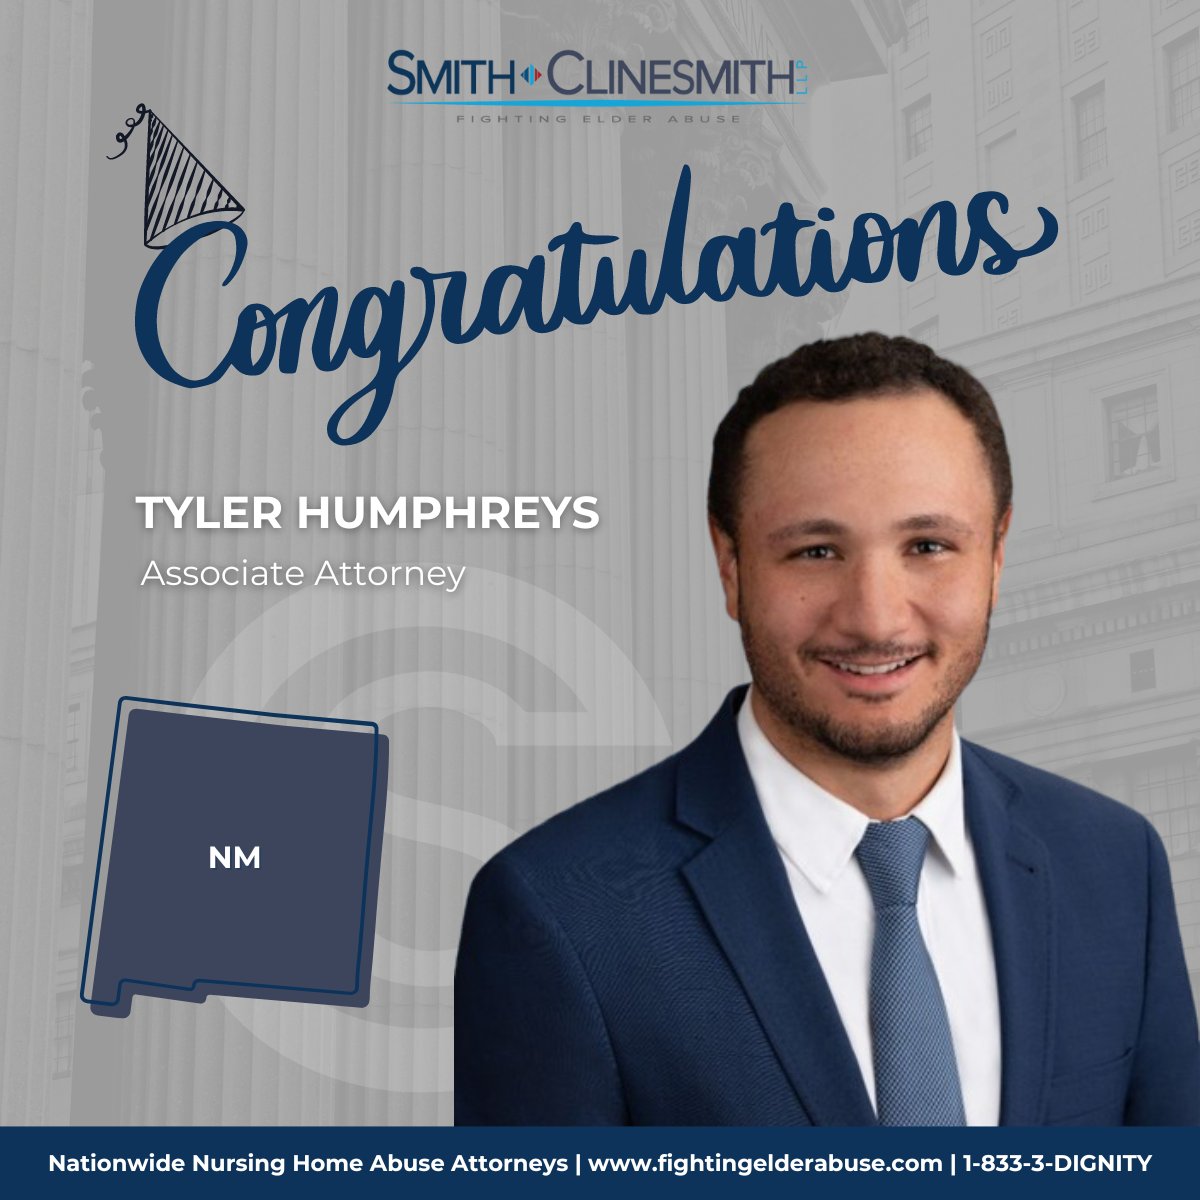 Congrats to our associate attorney Tyler Humphreys for becoming licensed to practice law in New Mexico! 🎉⚖️ #TeamSmithClinesmith #RaisingtheBar #lawyer #newmexico